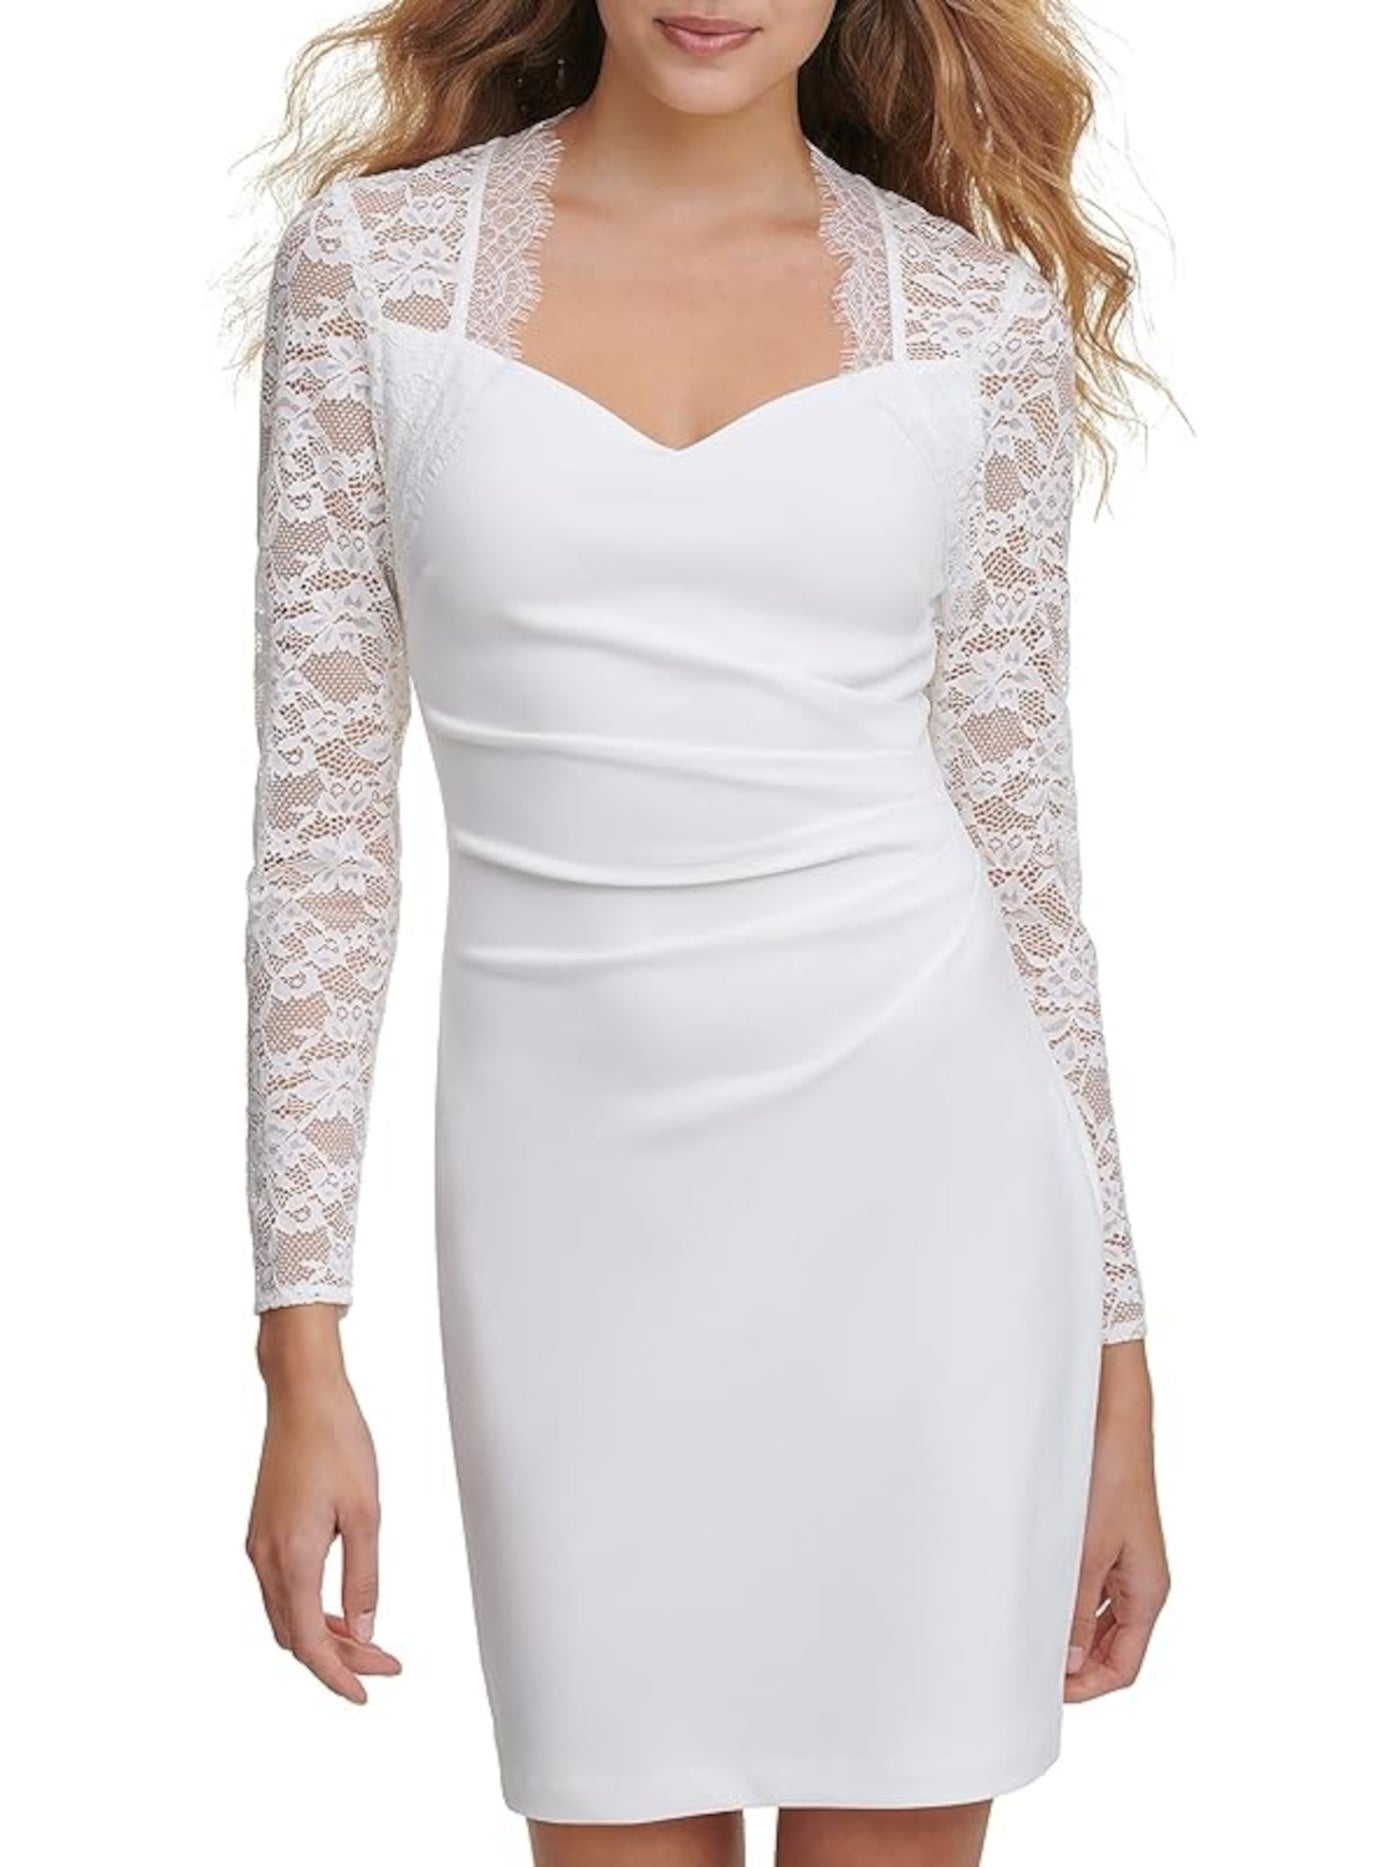 GUESS Womens Ivory Stretch Zippered Cut Out Lace Long Sleeve Queen Anne Neckline Mini Cocktail Body Con Dress 14